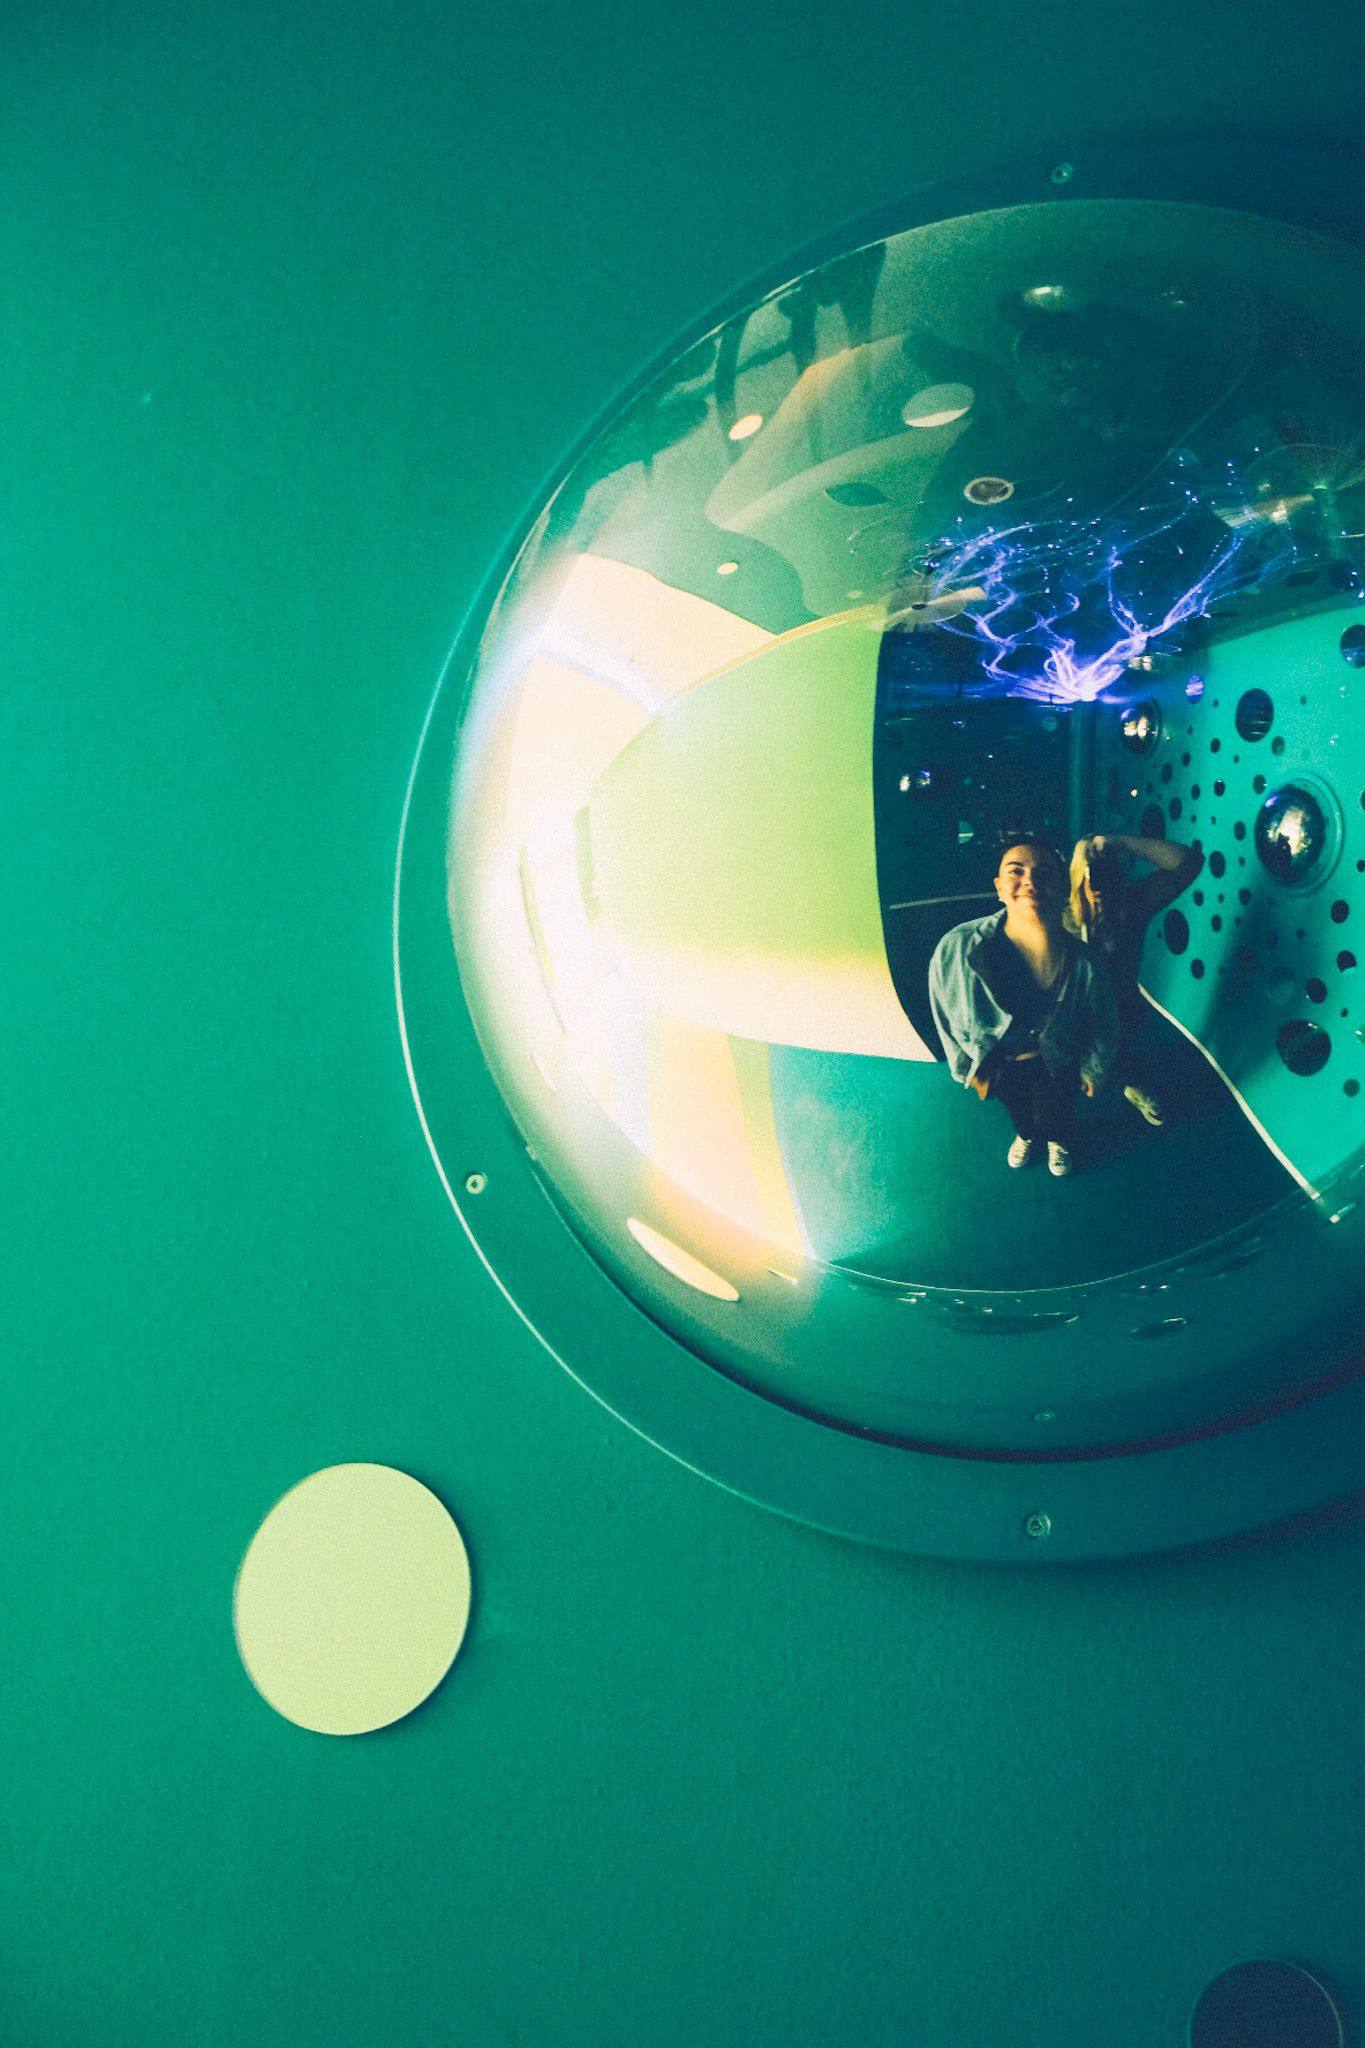 Two women are reflected in a chrome bubble jutting out from a green wall in the children’s section of a museum. Their images are warped in the sphere.